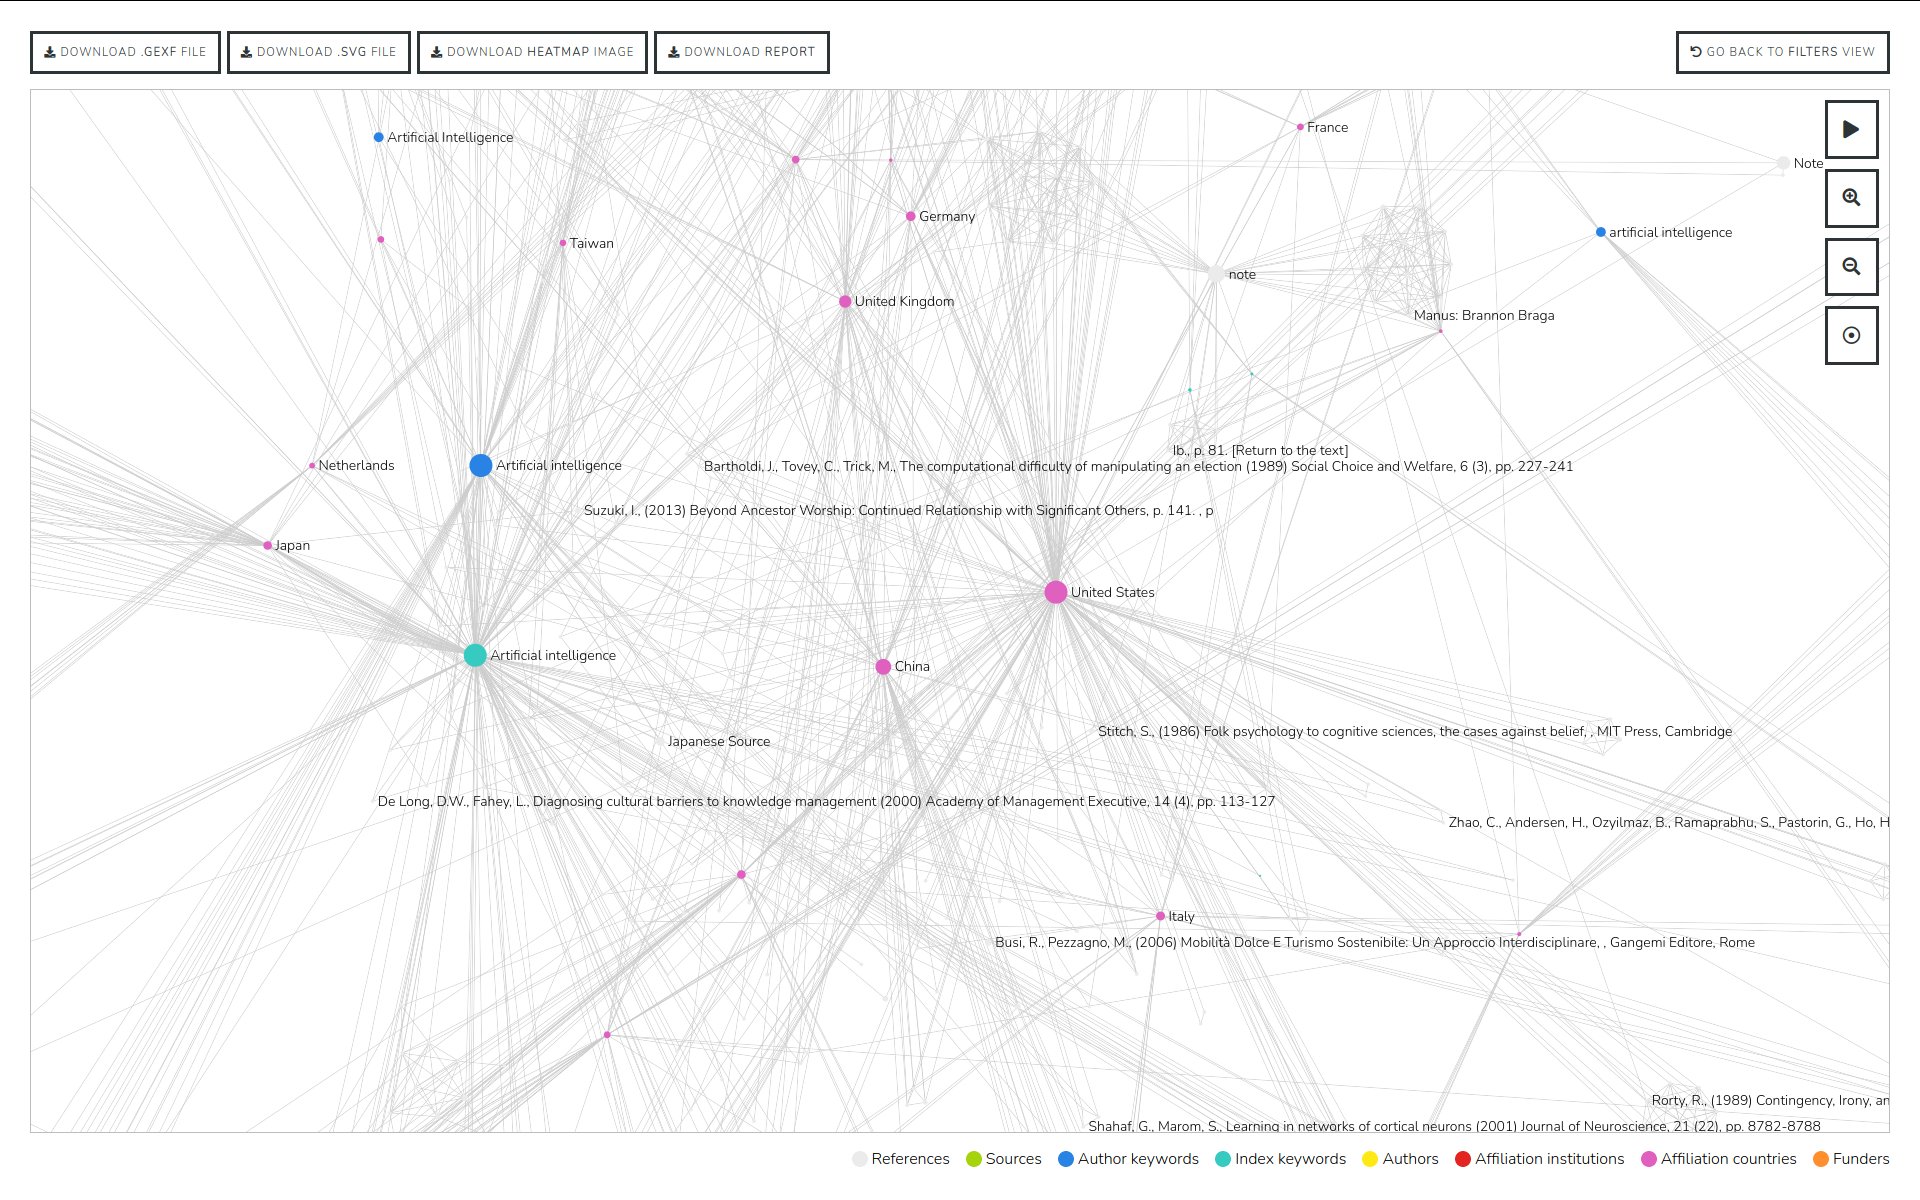 Finally, the co-reference network with metadata nodes visualized.